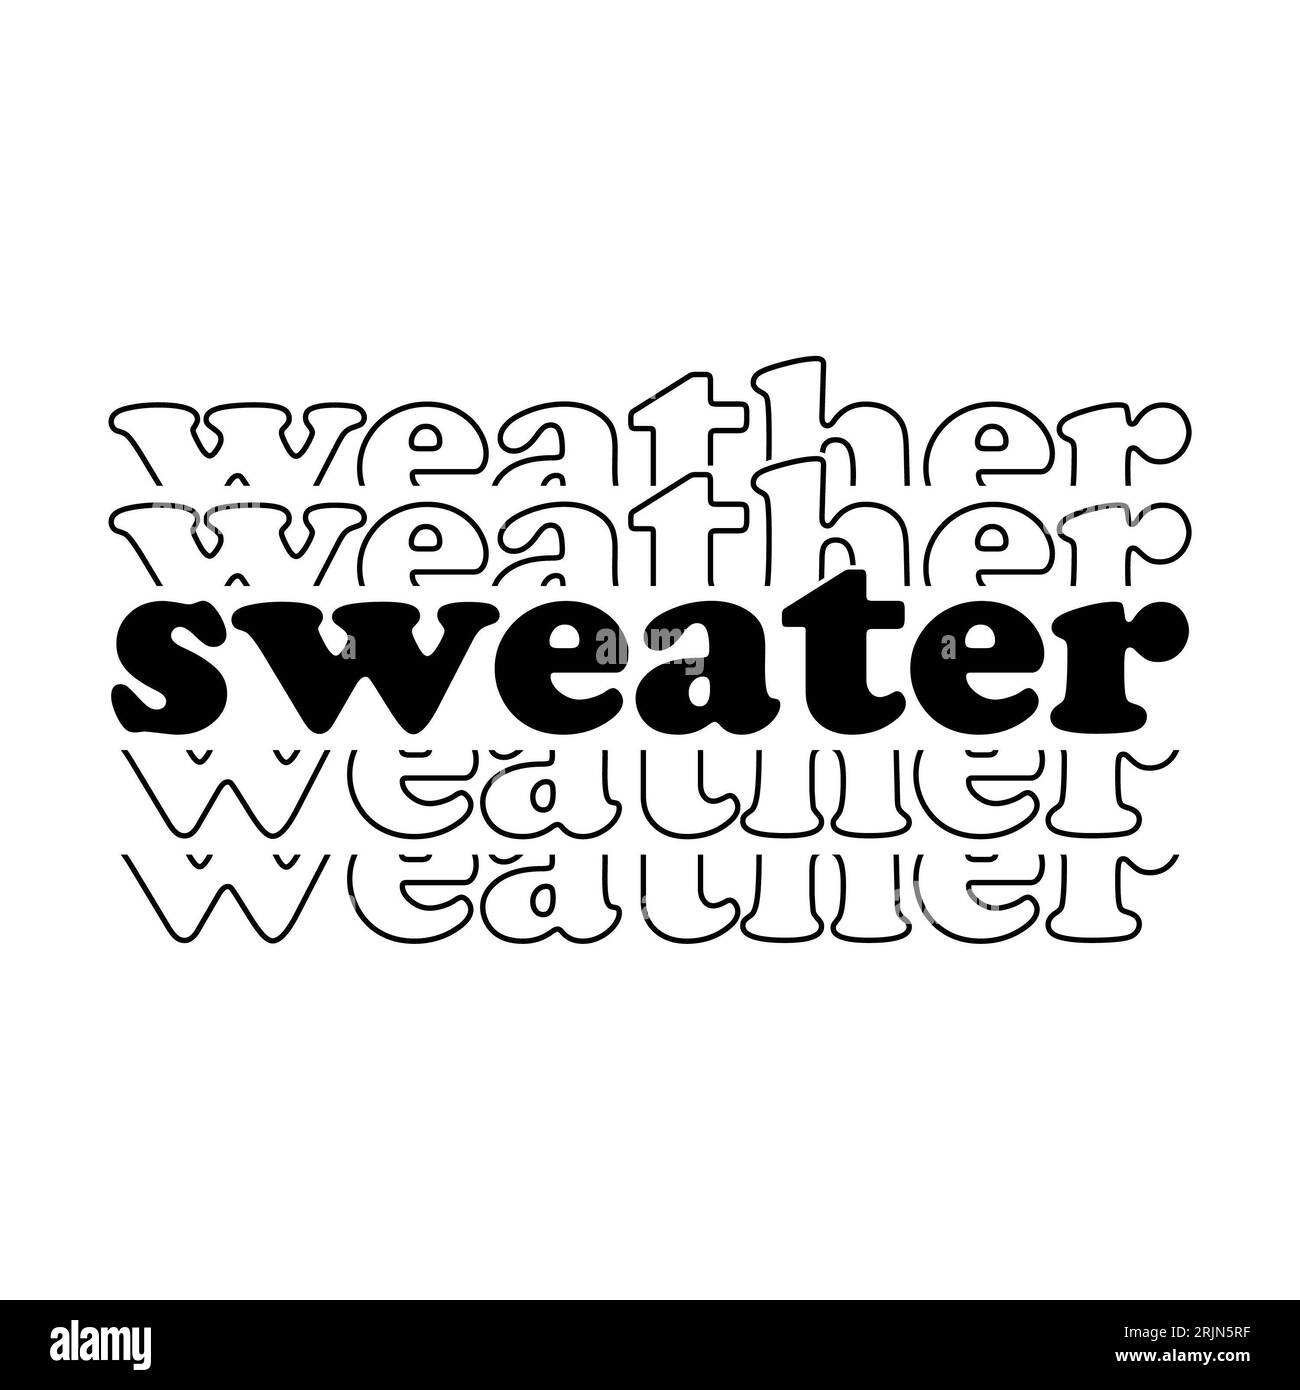 Sweater weather as stacked on white background. Isolated illustration. Stock Photo